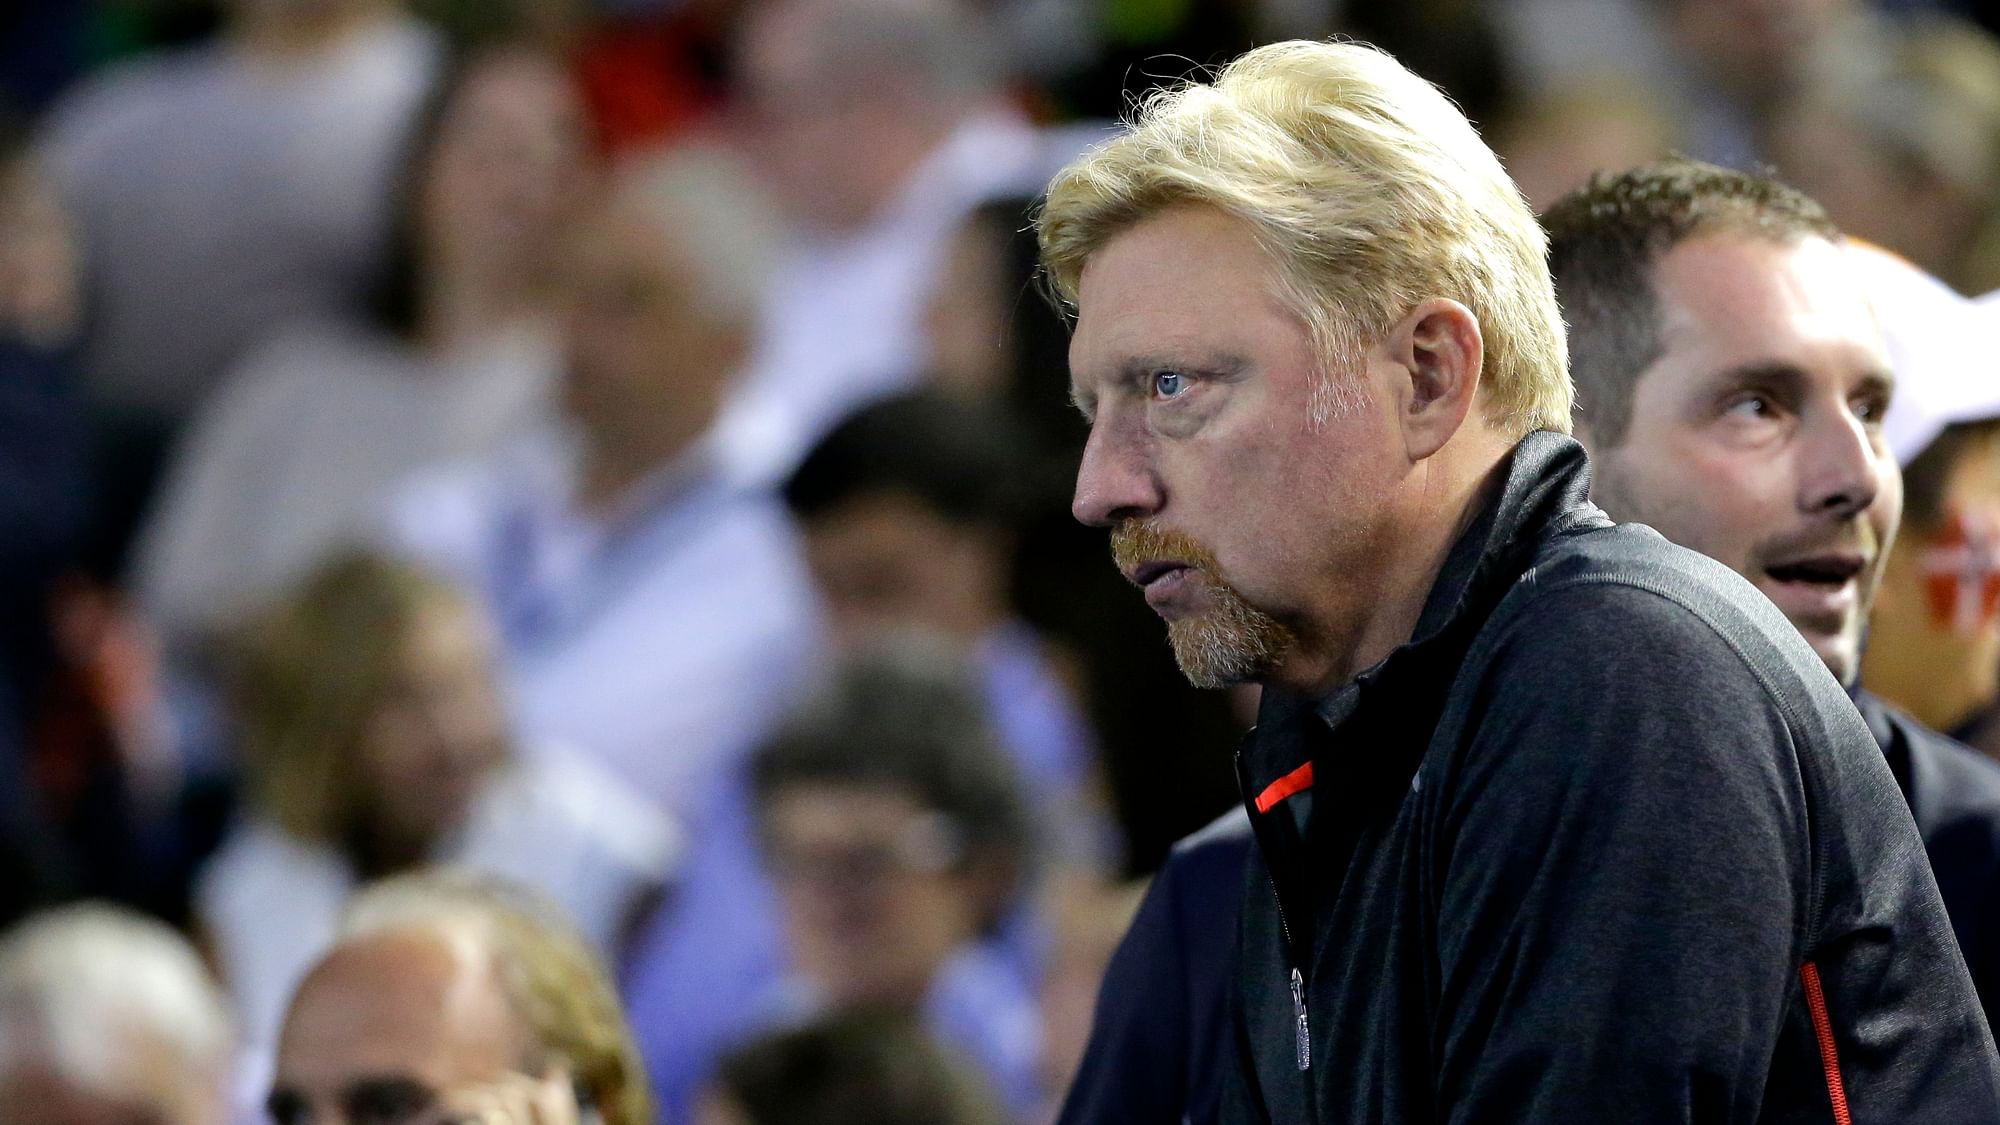 Boris Becker raised approximately £687,000, according to the company dealing with his bankruptcy.